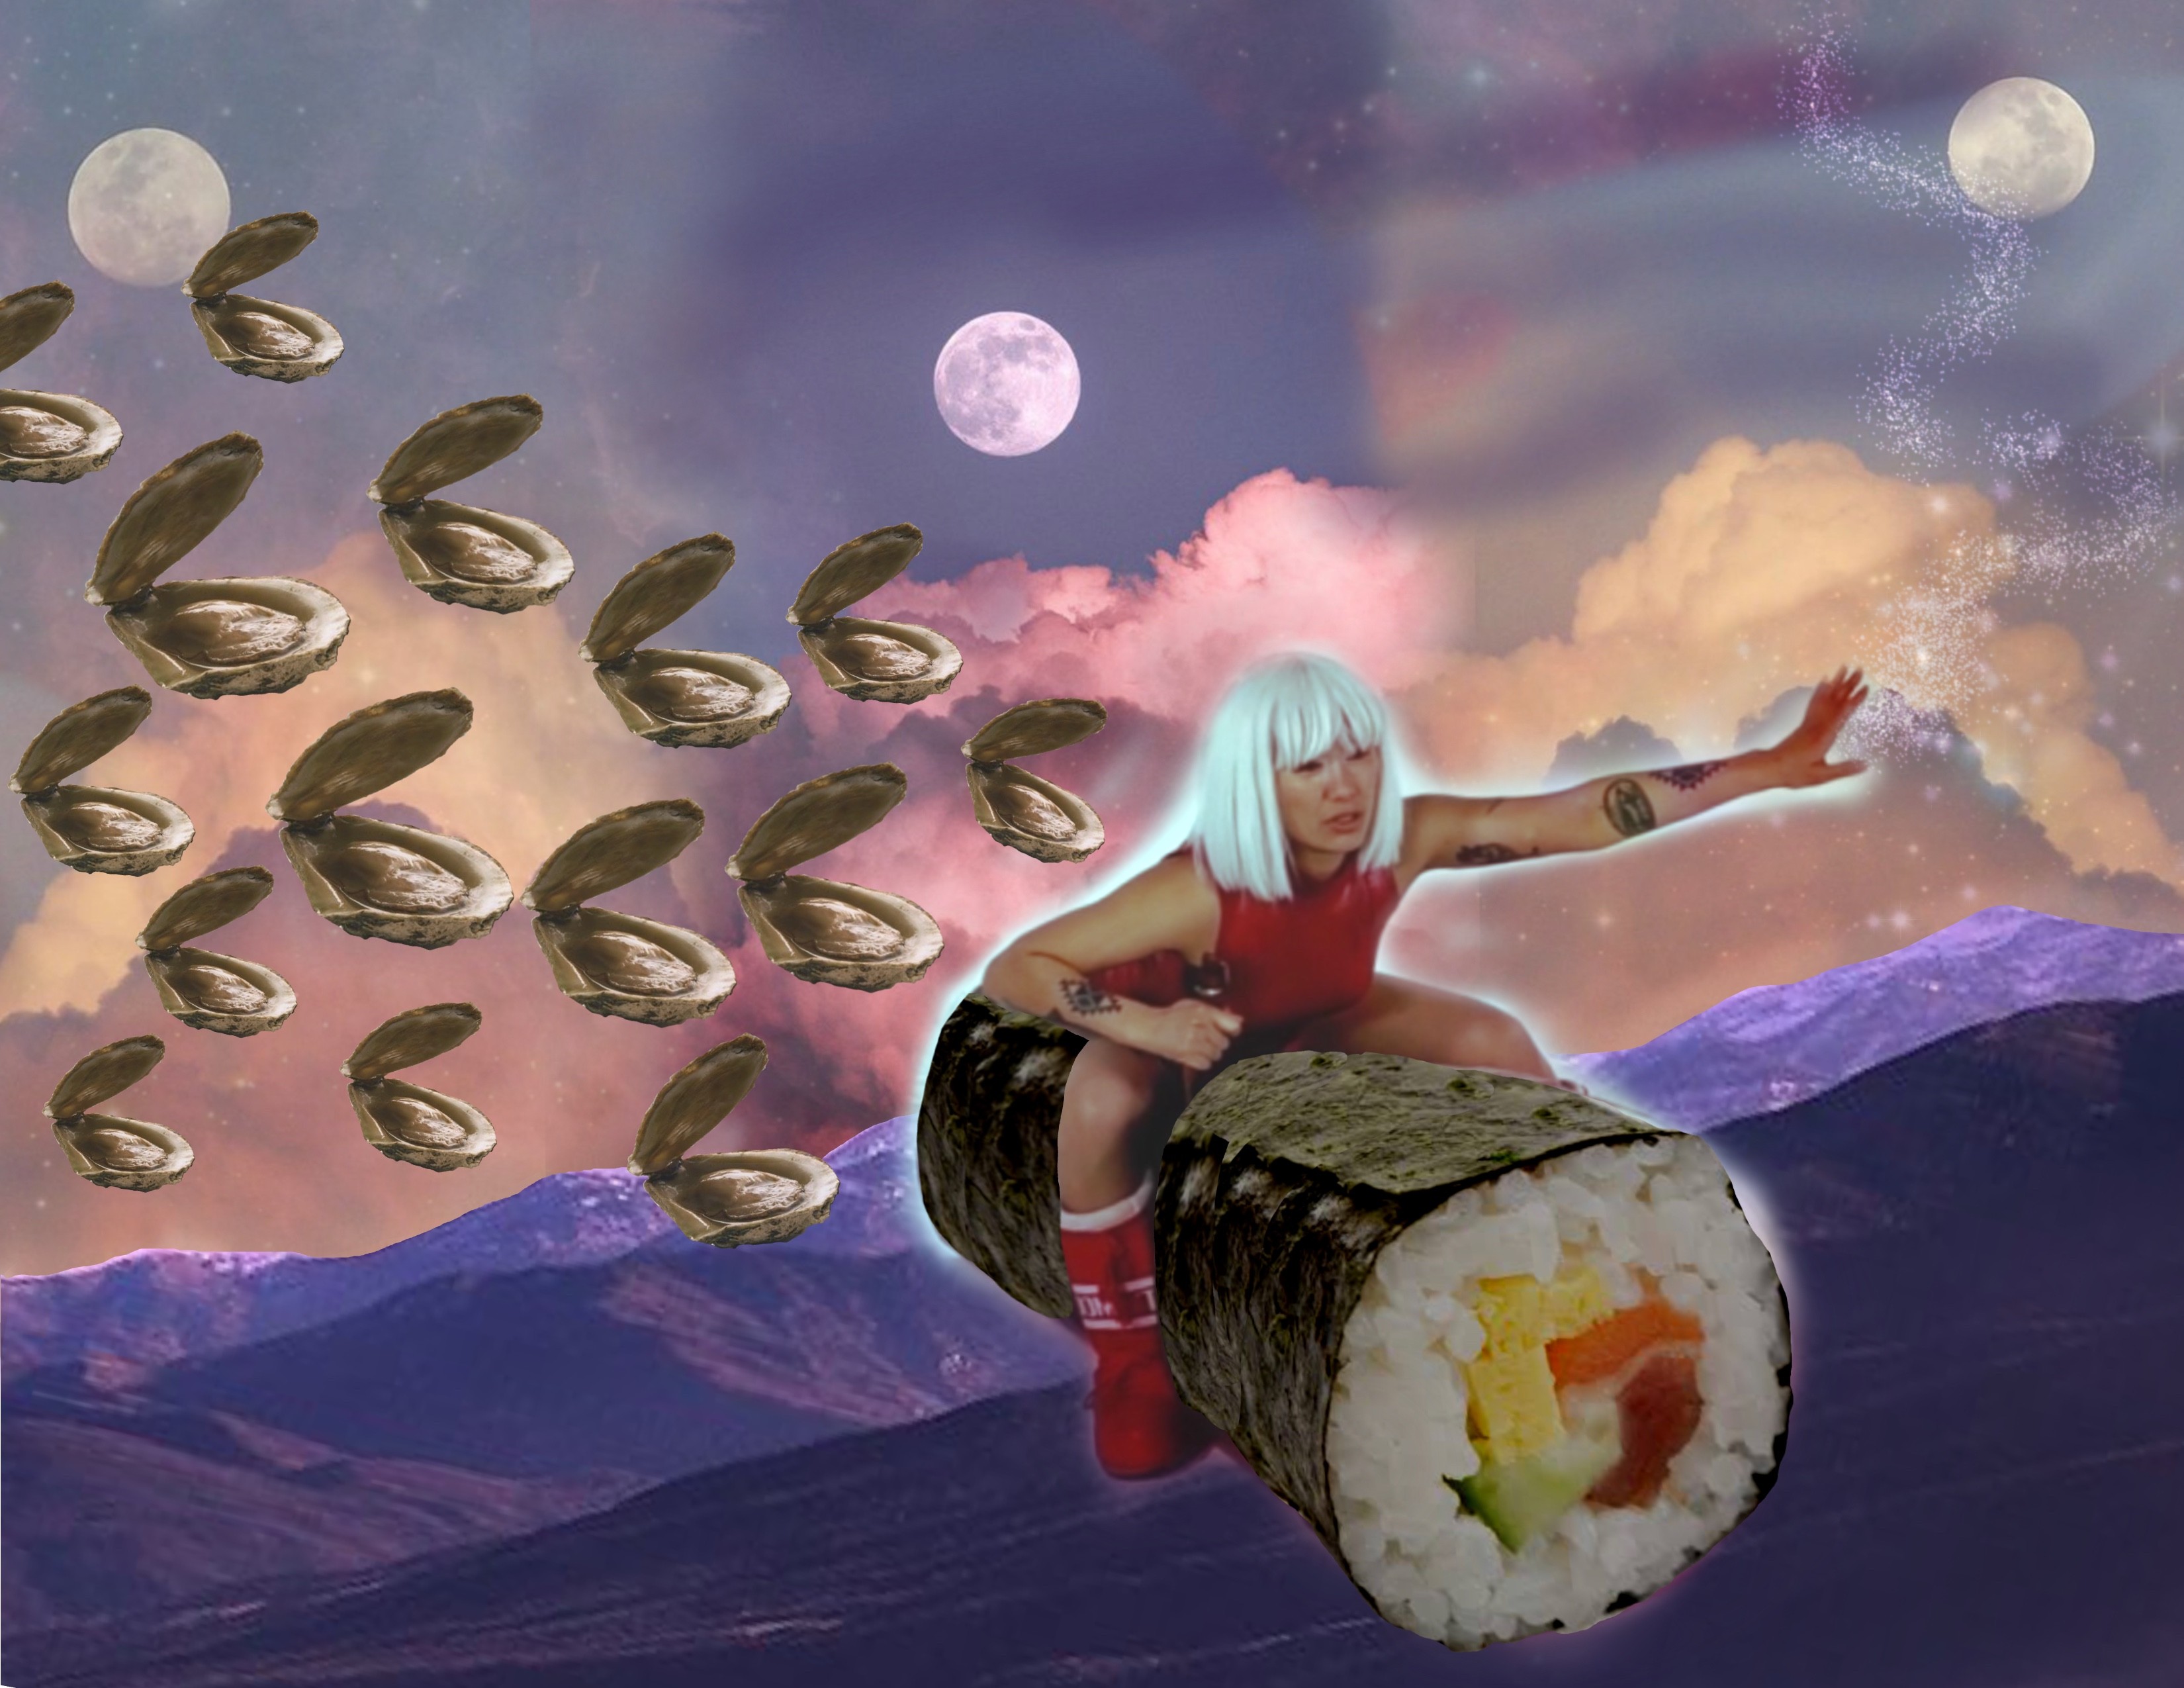 Emiko Sheehan rides a giant sushi roll while being chased by bluff oysters across the sky.